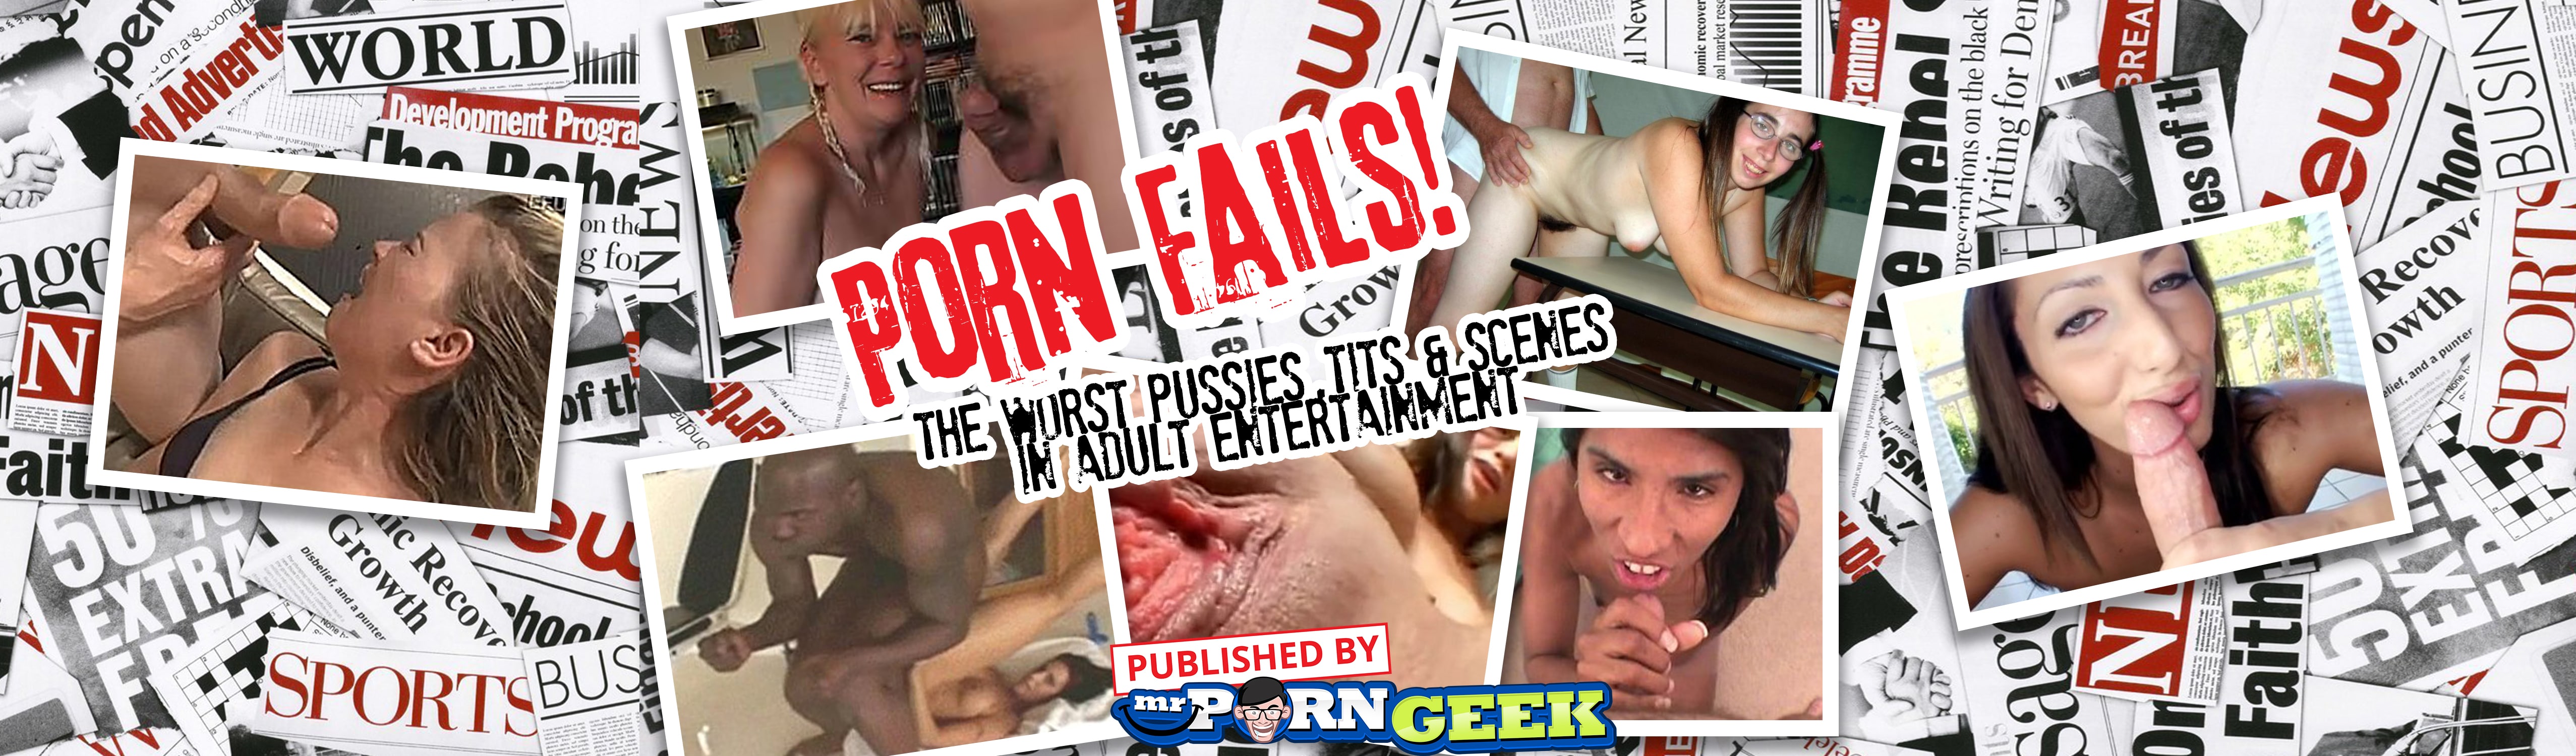 Worst Porn Star Vaginas - Porn Fails: The Worst Pussies, Tits & Scenes in Adult ...